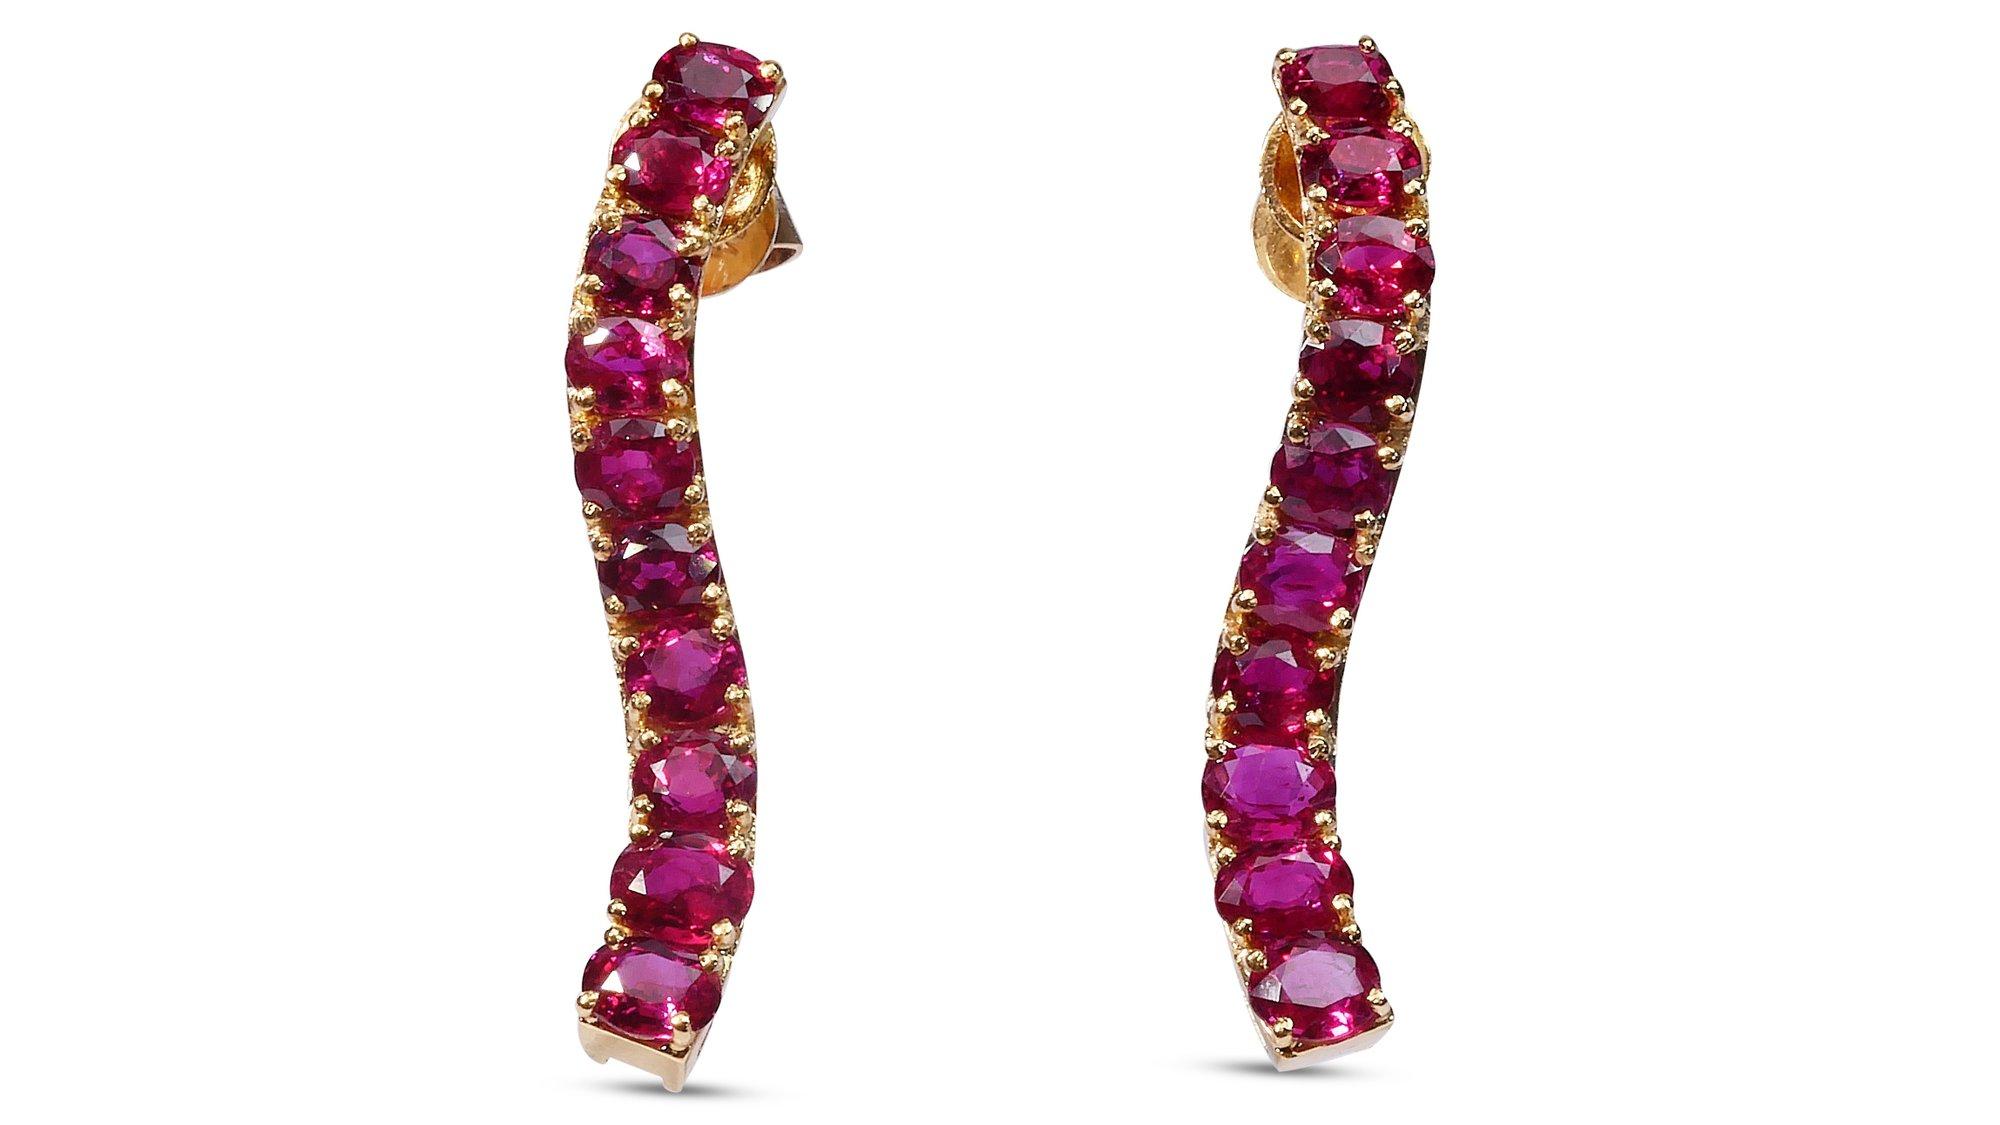 Stunning earring made from 18k yellow gold with 4.00 total carat of oval mixed cut rubies. This earring comes with an IGI report and a fancy box.

- 20 ruby main stones of 0.20 ct. each, total: 4.00 ct. 
Cut: Oval mixed cut
Color: Deep purple